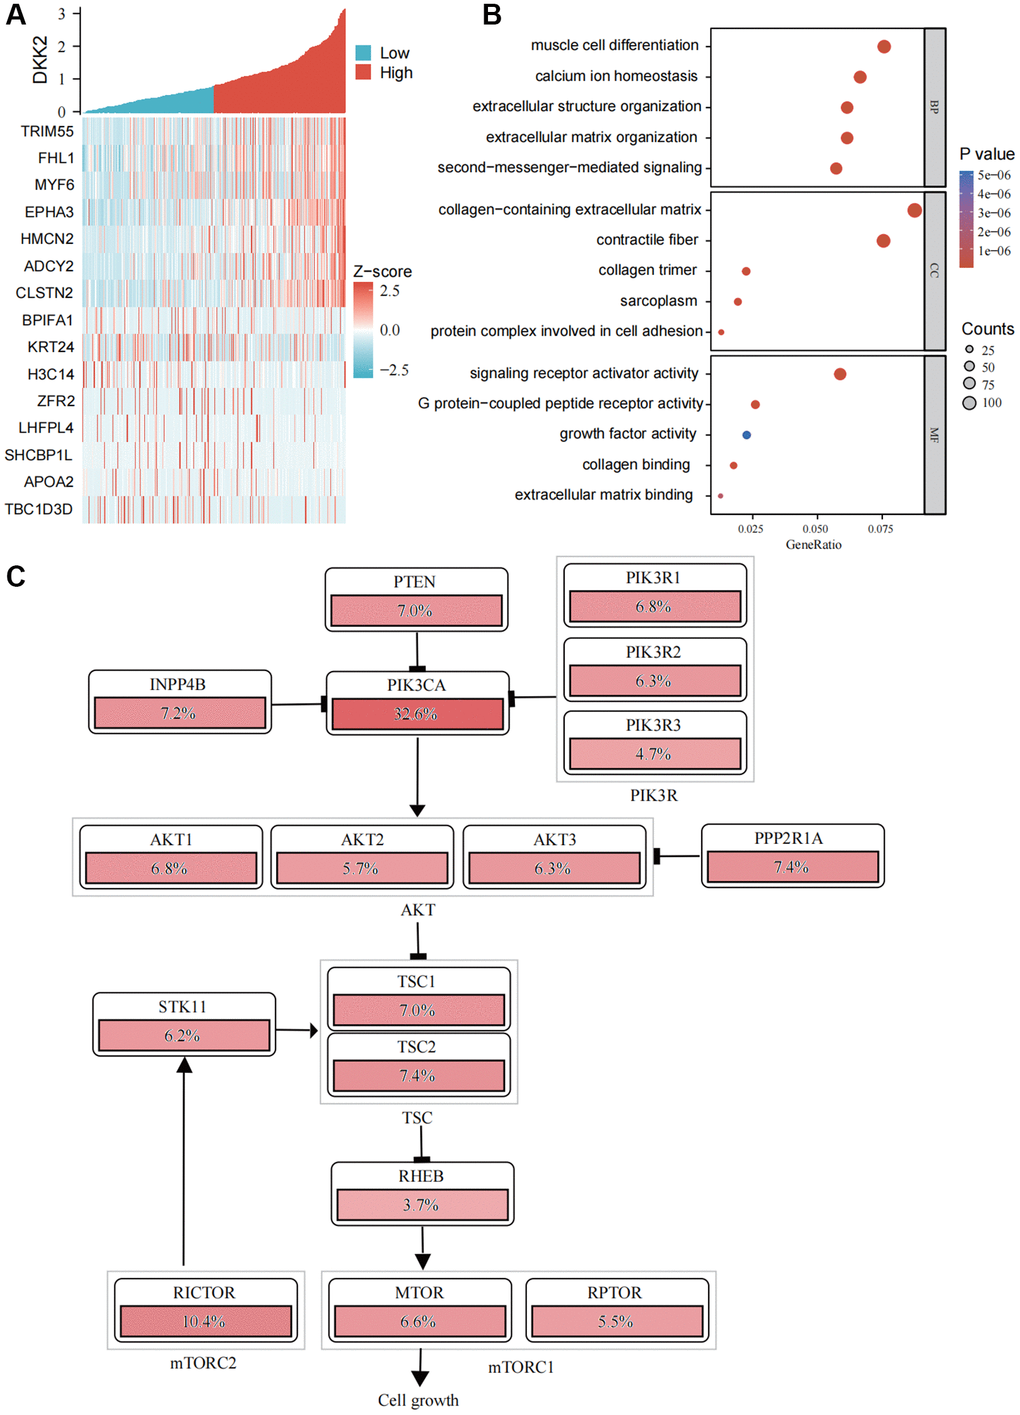 Functional enrichment analysis of DKK2. (A) Heatmap of DKK2 co-expressed genes in oral squamous cell carcinoma. (B) Gene Ontology enrichment analysis. (C) Schematic diagram of DKK2 affecting the PI3K/AKT signaling pathway. *p **p ***p ****p 